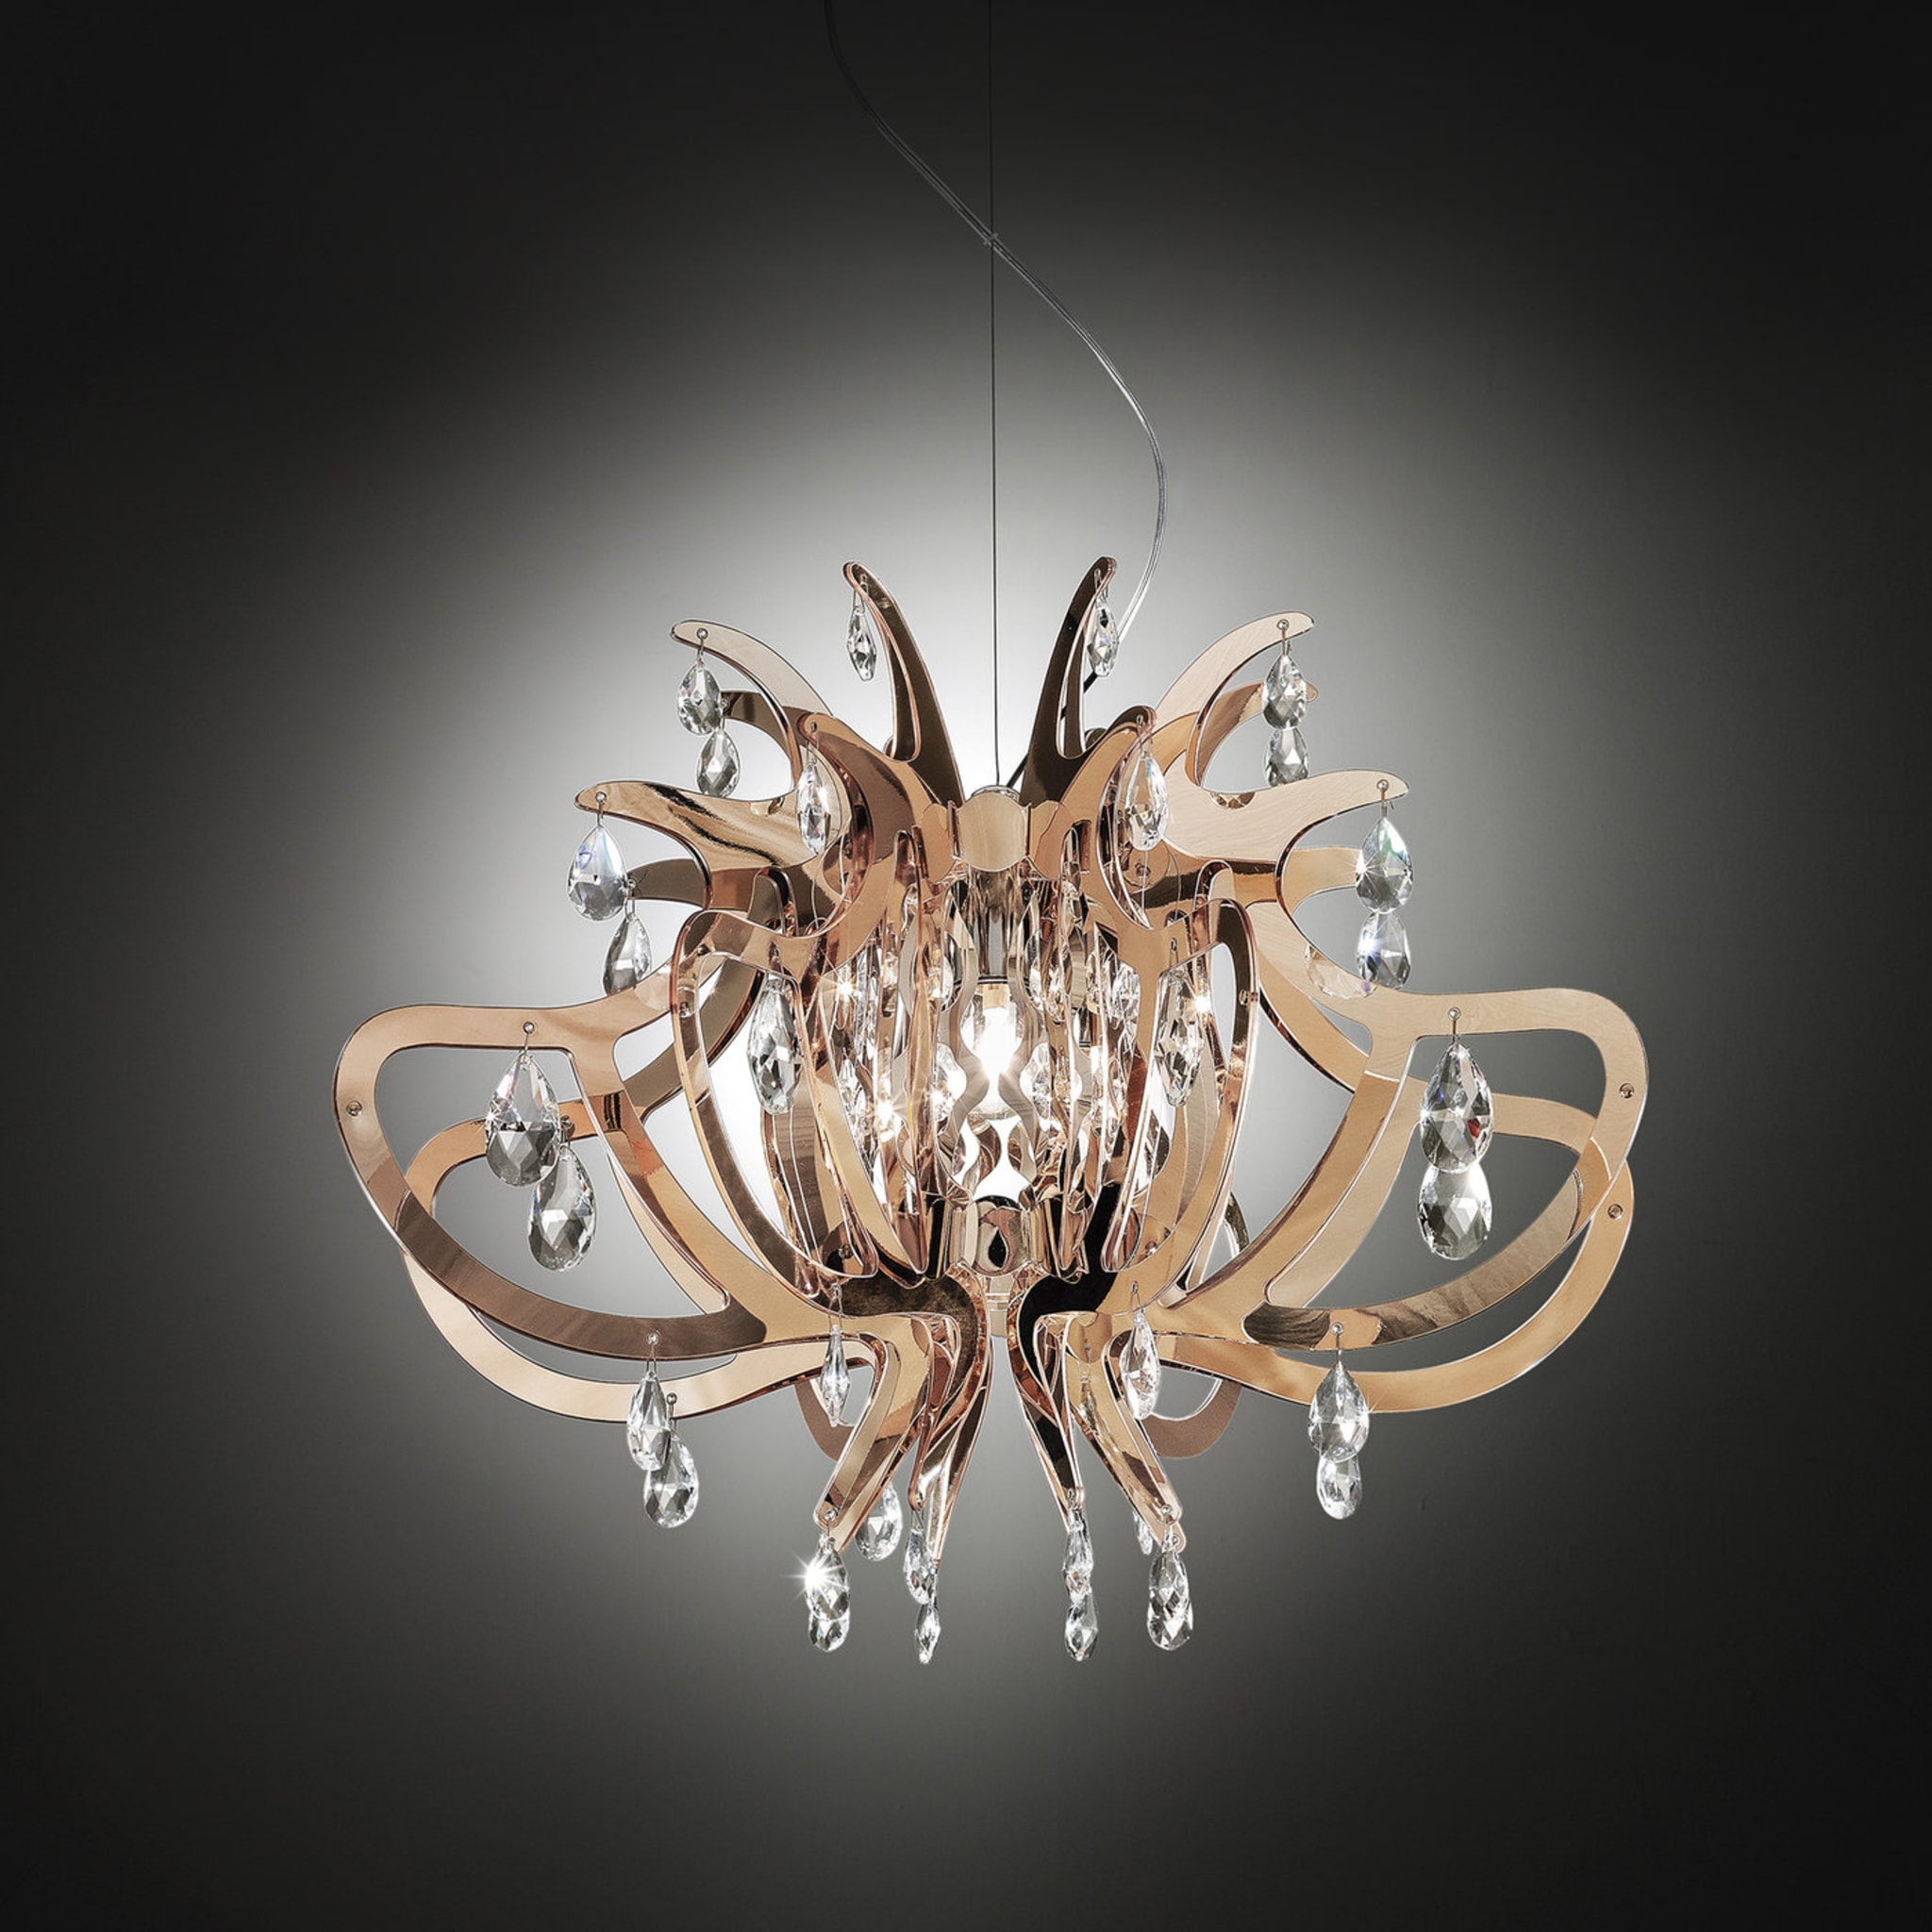 Lillibet Copper Ceiling Lamp by Nigel Coates - Alternative view 3